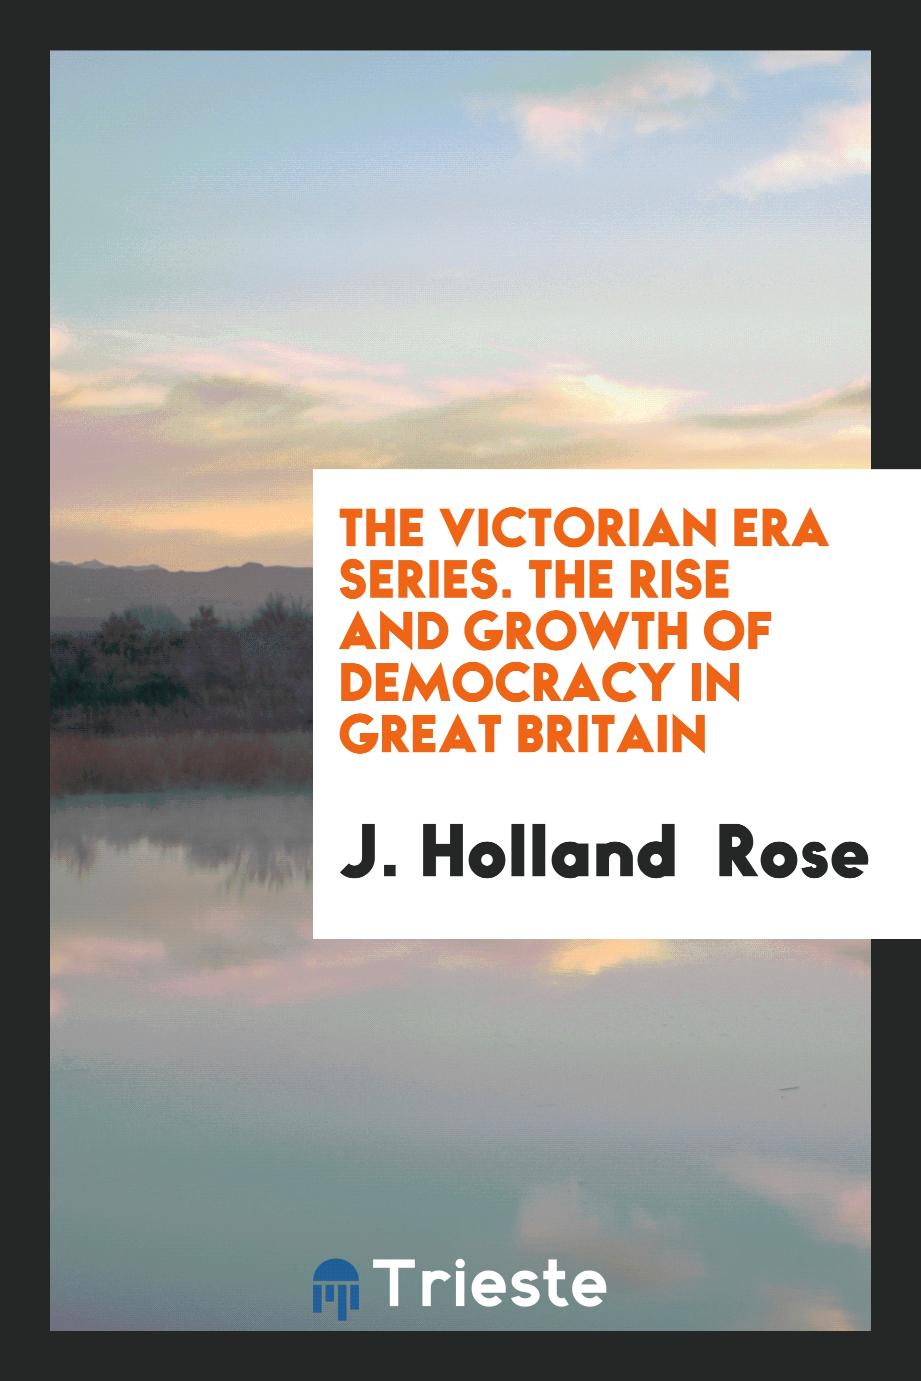 The Victorian Era Series. The Rise and Growth of Democracy in Great Britain